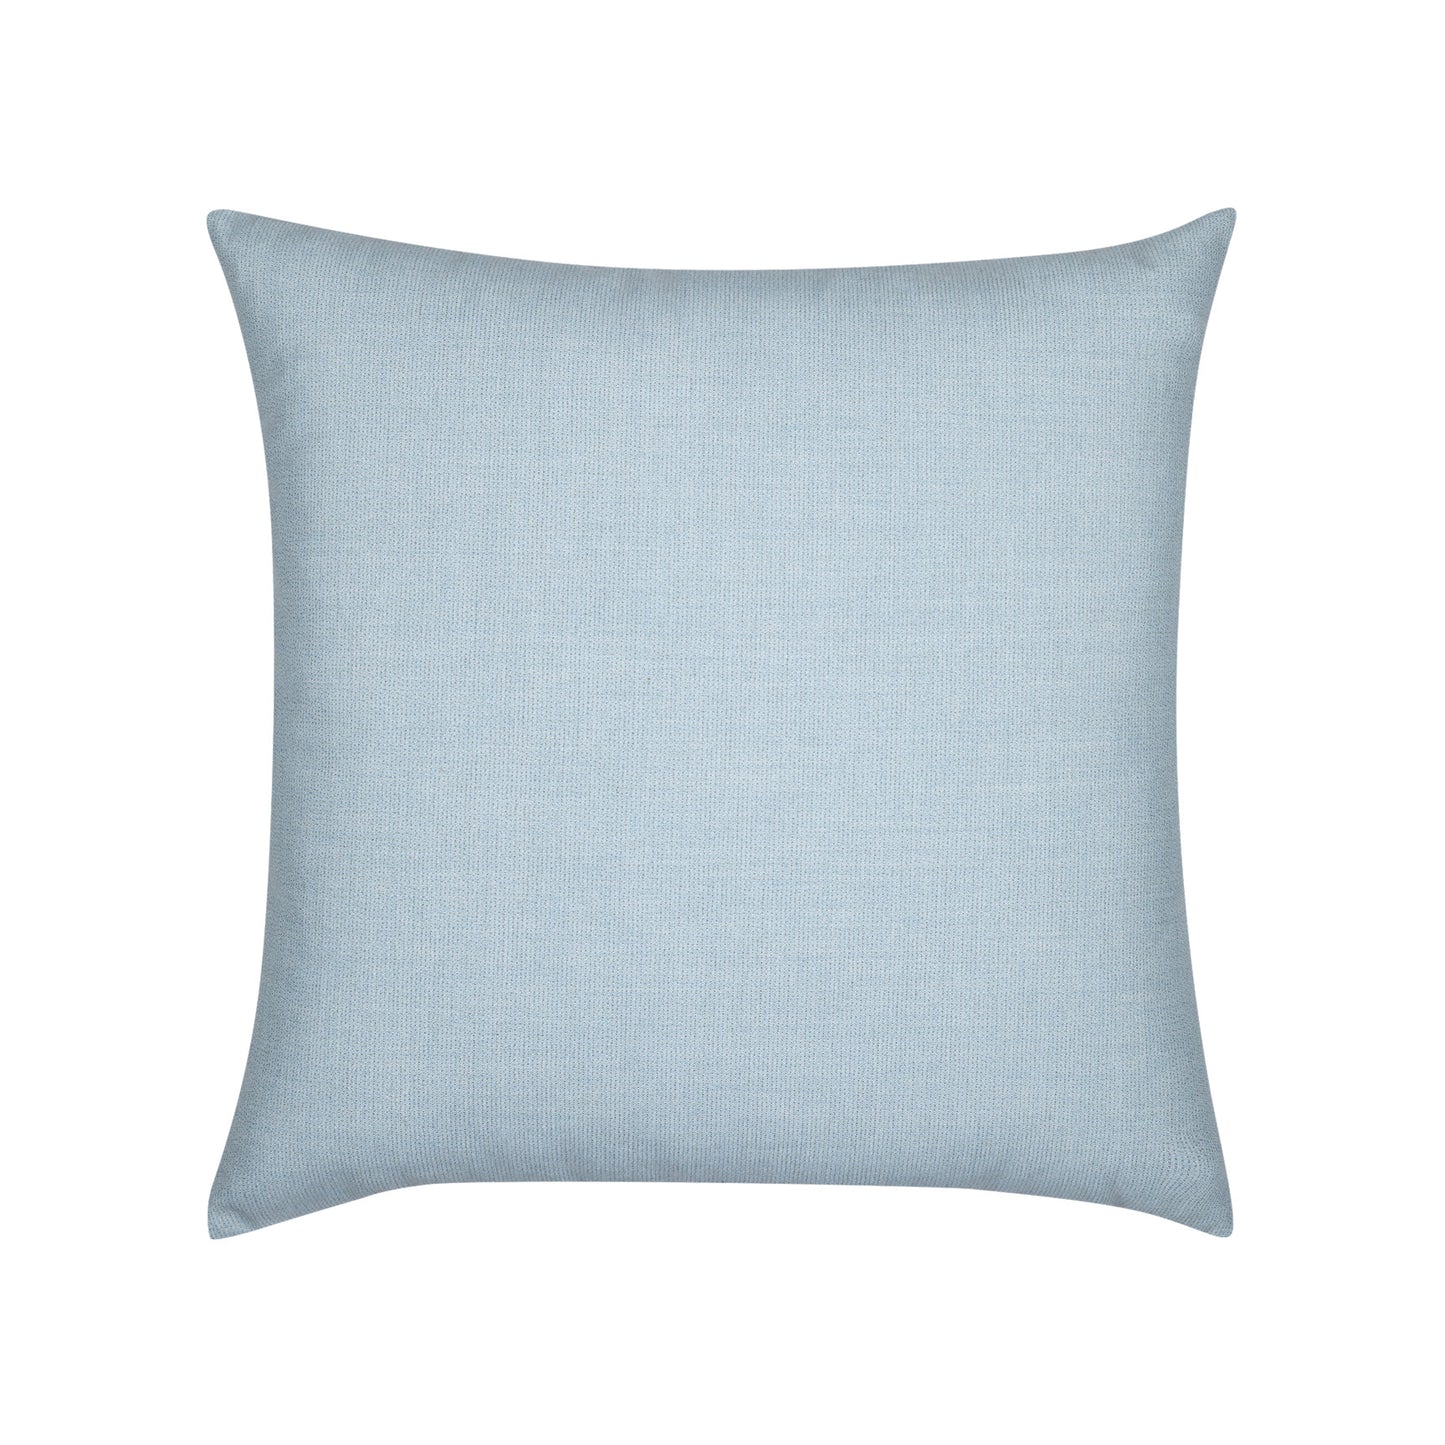 17" Square Elaine Smith Pillow  Solid Dew